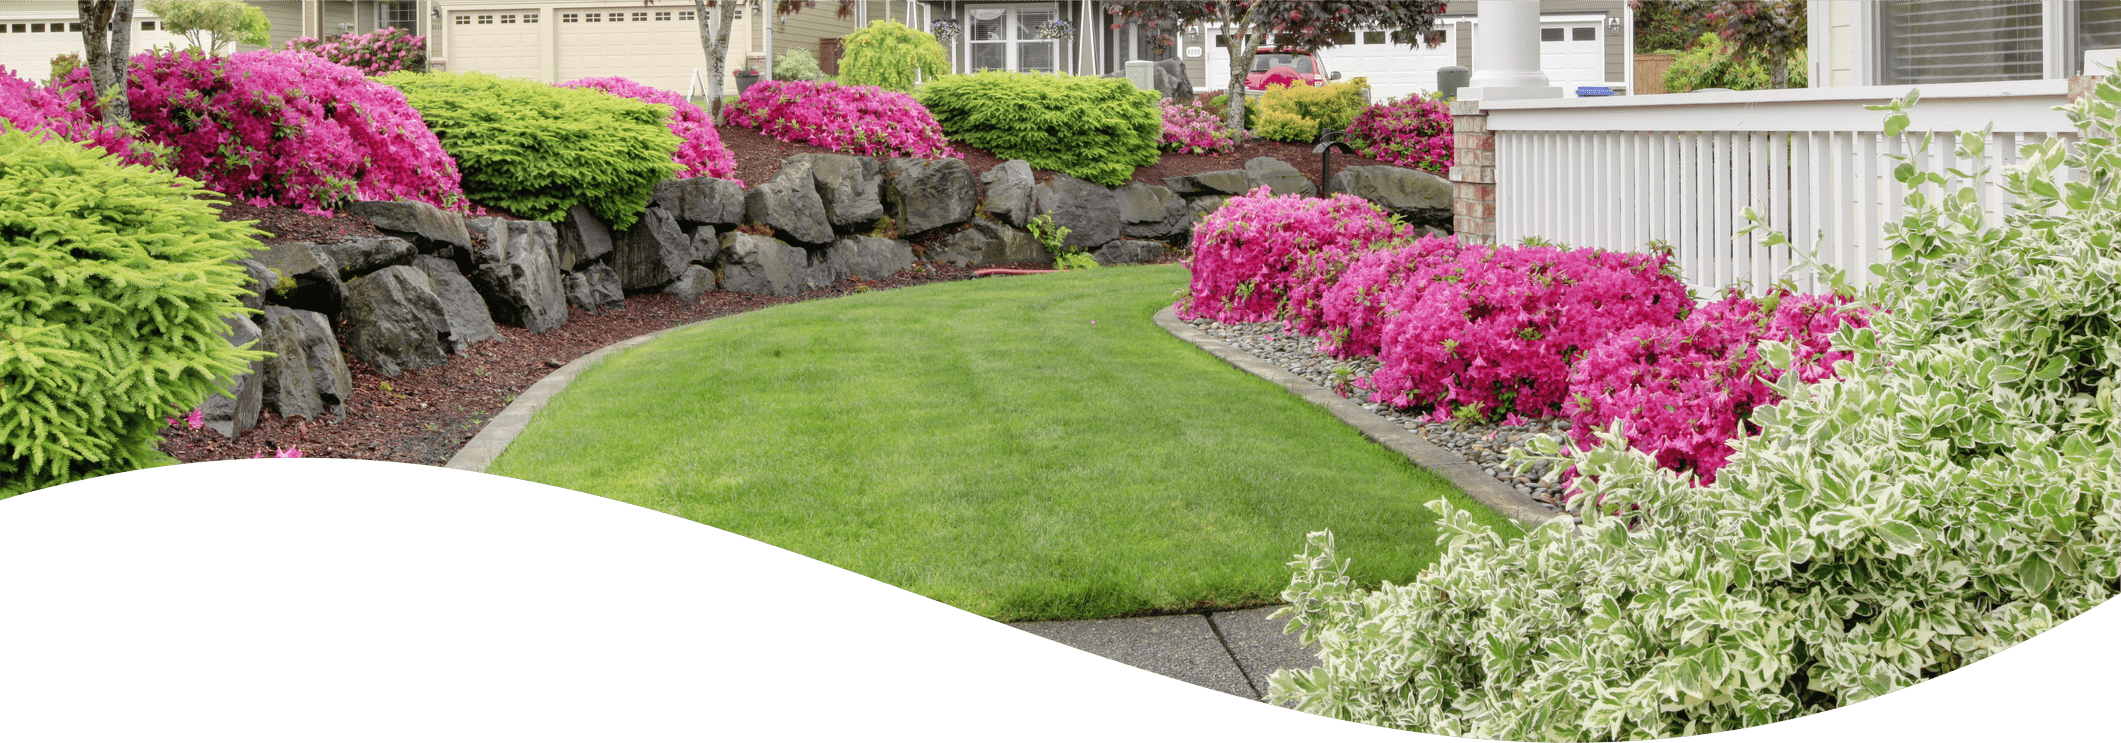 A well-manicured lawn curves around a vibrant garden with pink flowers, green shrubs, and large rocks, adjacent to a driveway and white fence.